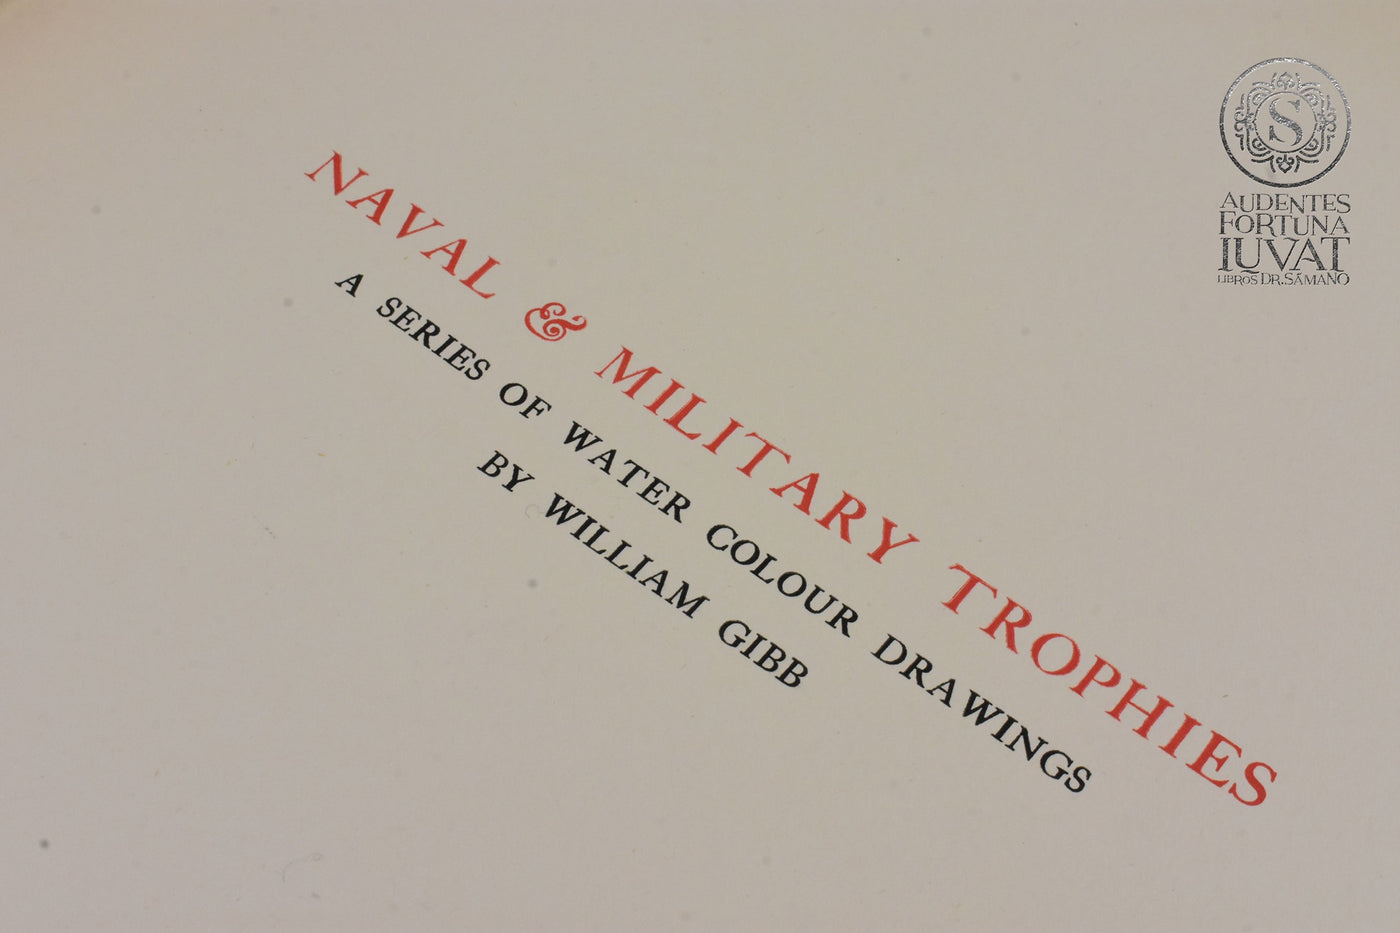 "Trophies & Personal Relics of British Heroes" - RICHARD R. HOLMES